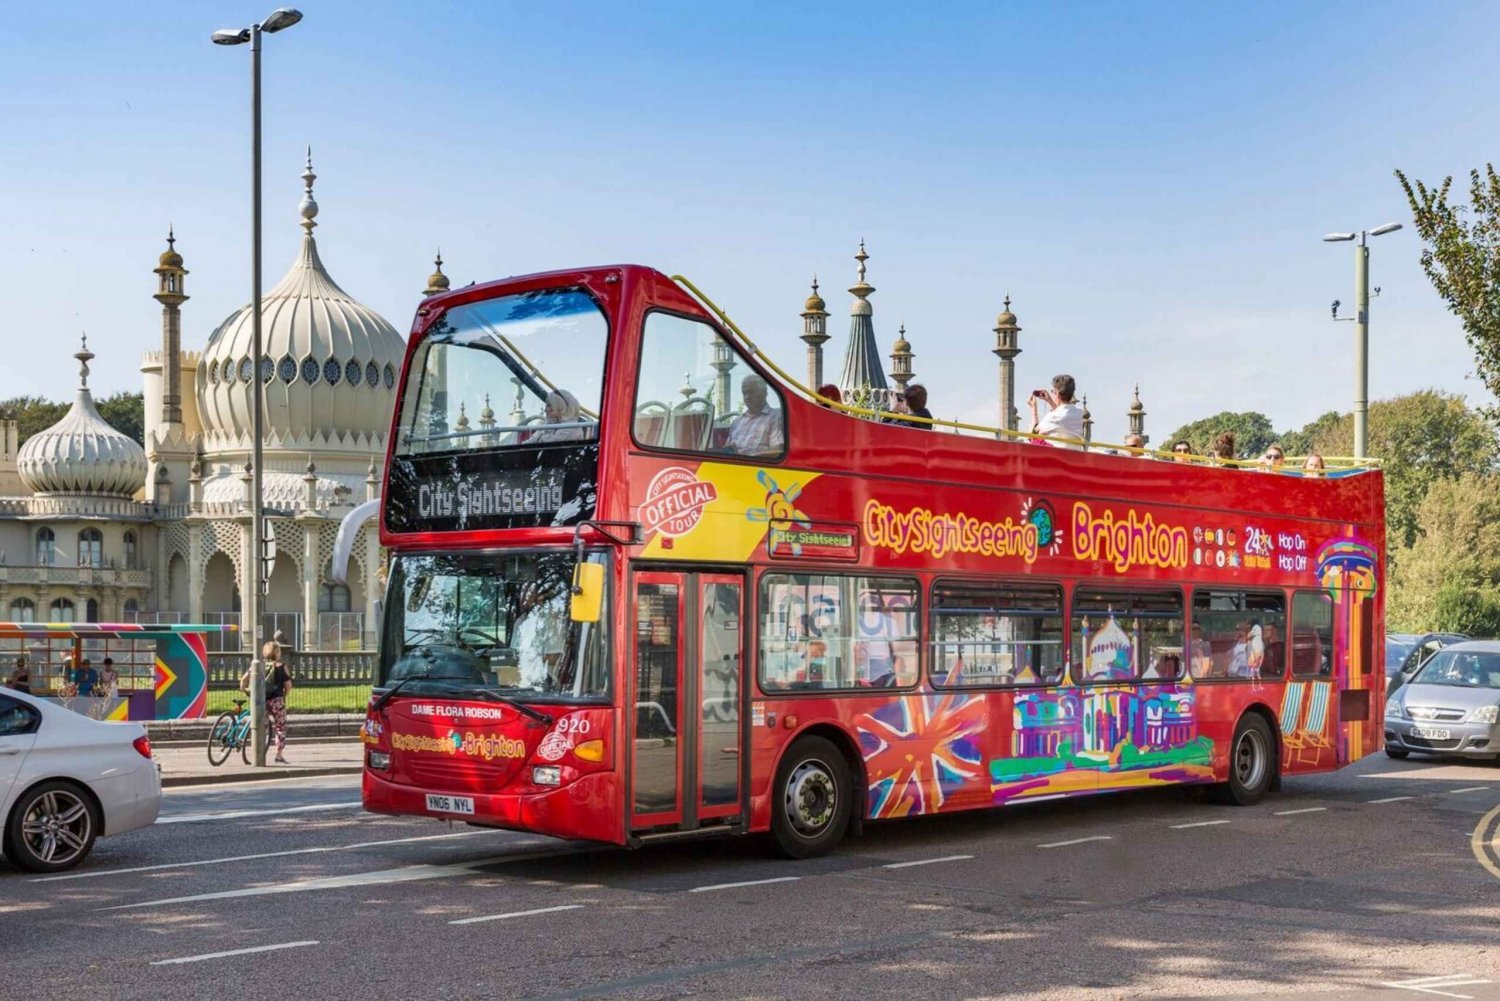 city city sightseeing tour